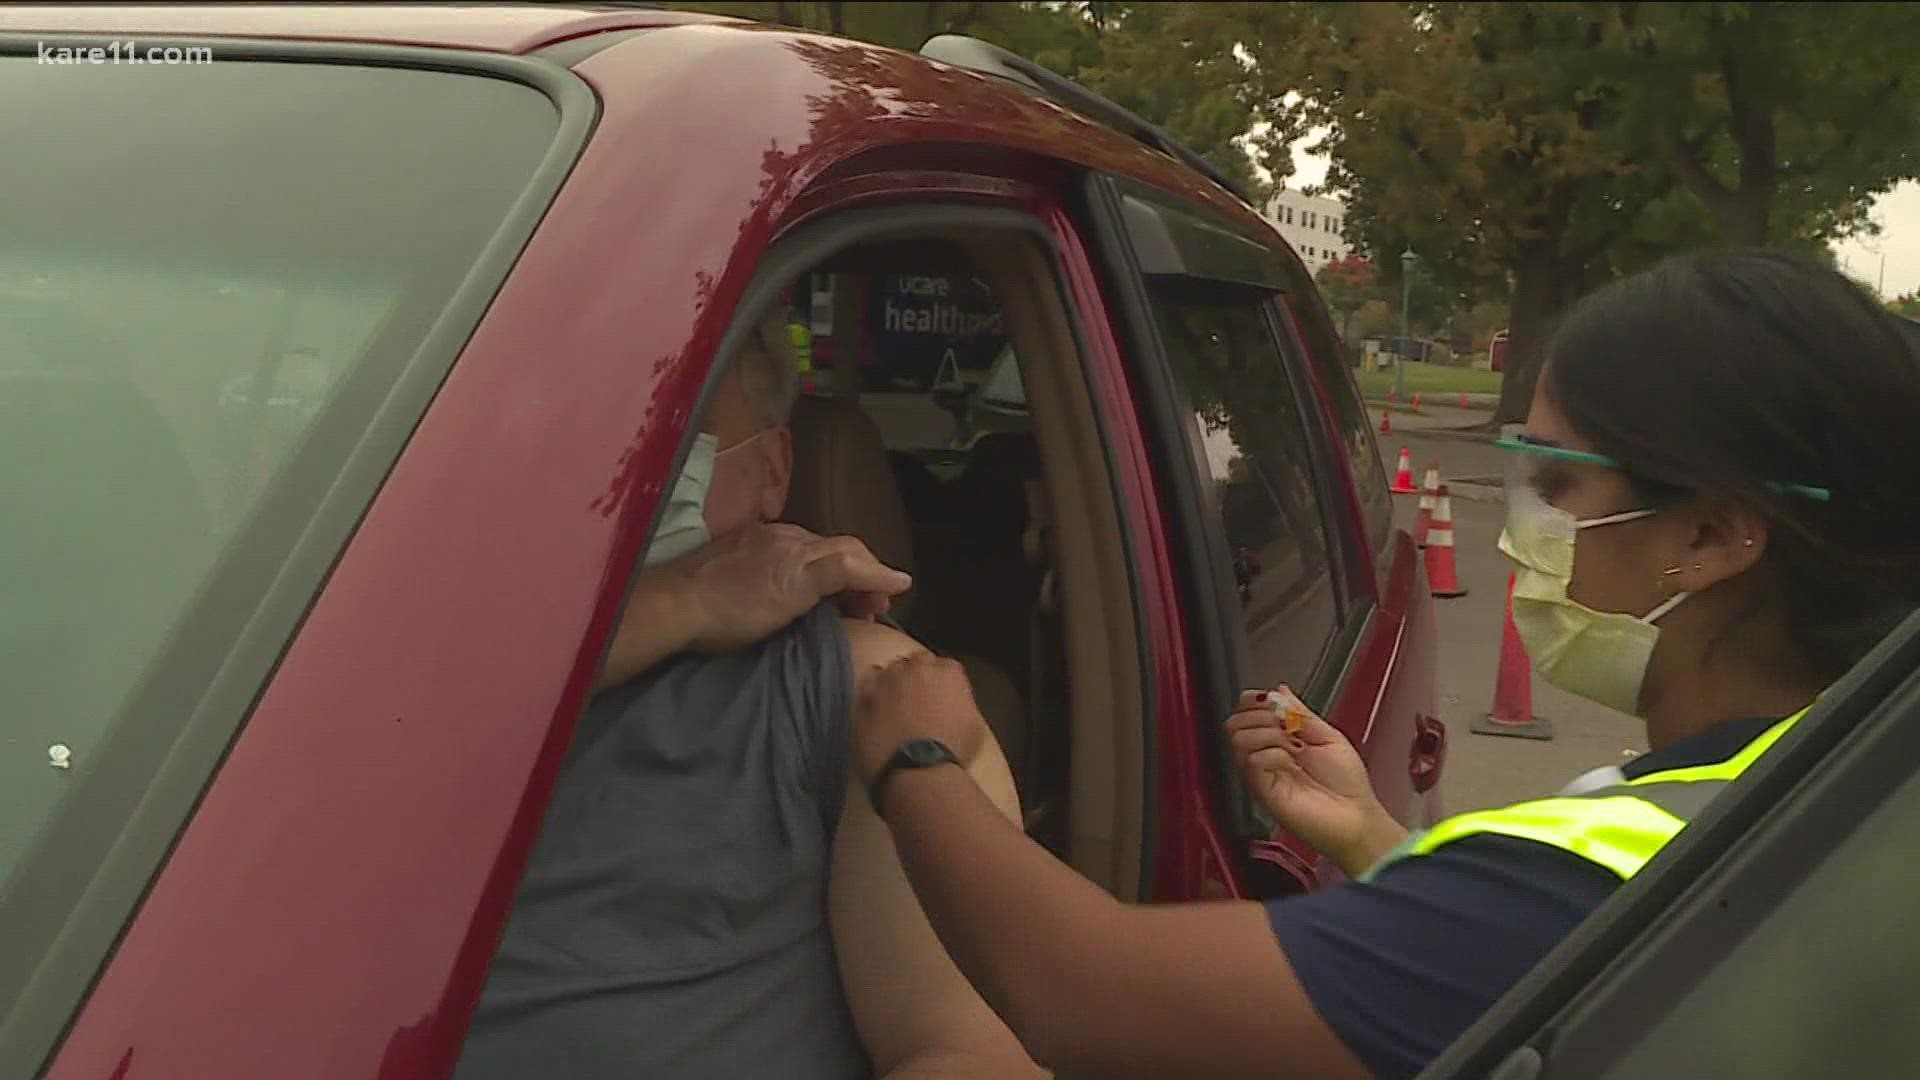 Getting your yearly flu shot has never been easier thanks to Health Fair 11’s drive-thru Flu Fighter Clinics.